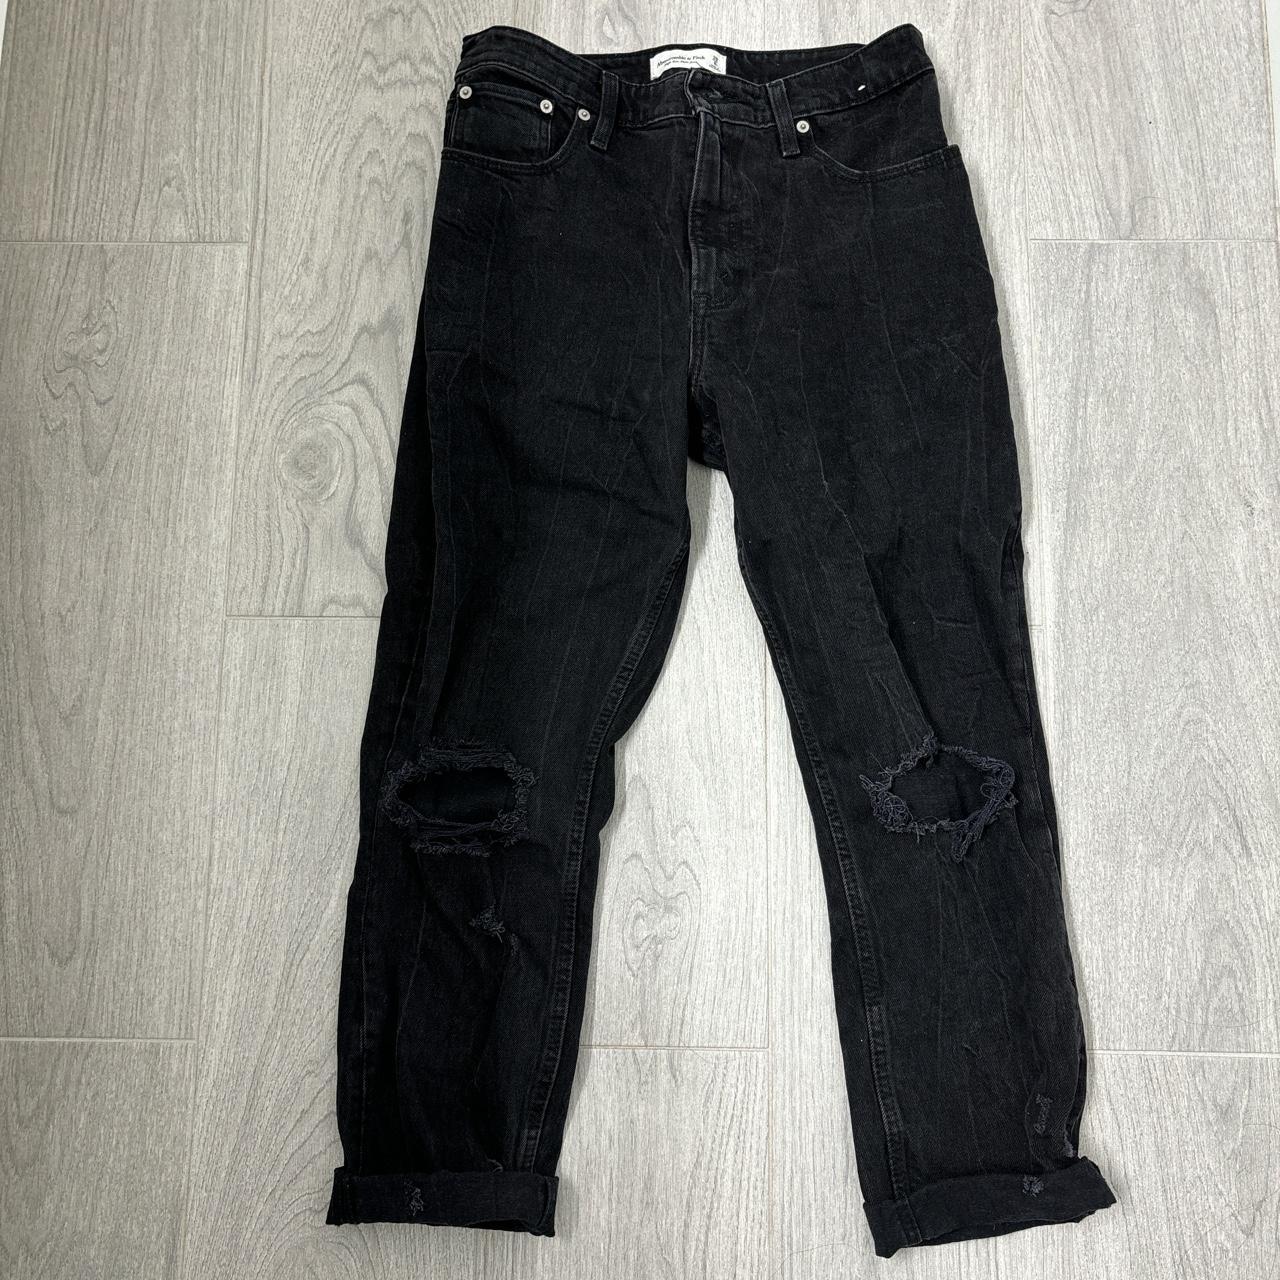 Women's Mom Jeans  Abercrombie & Fitch